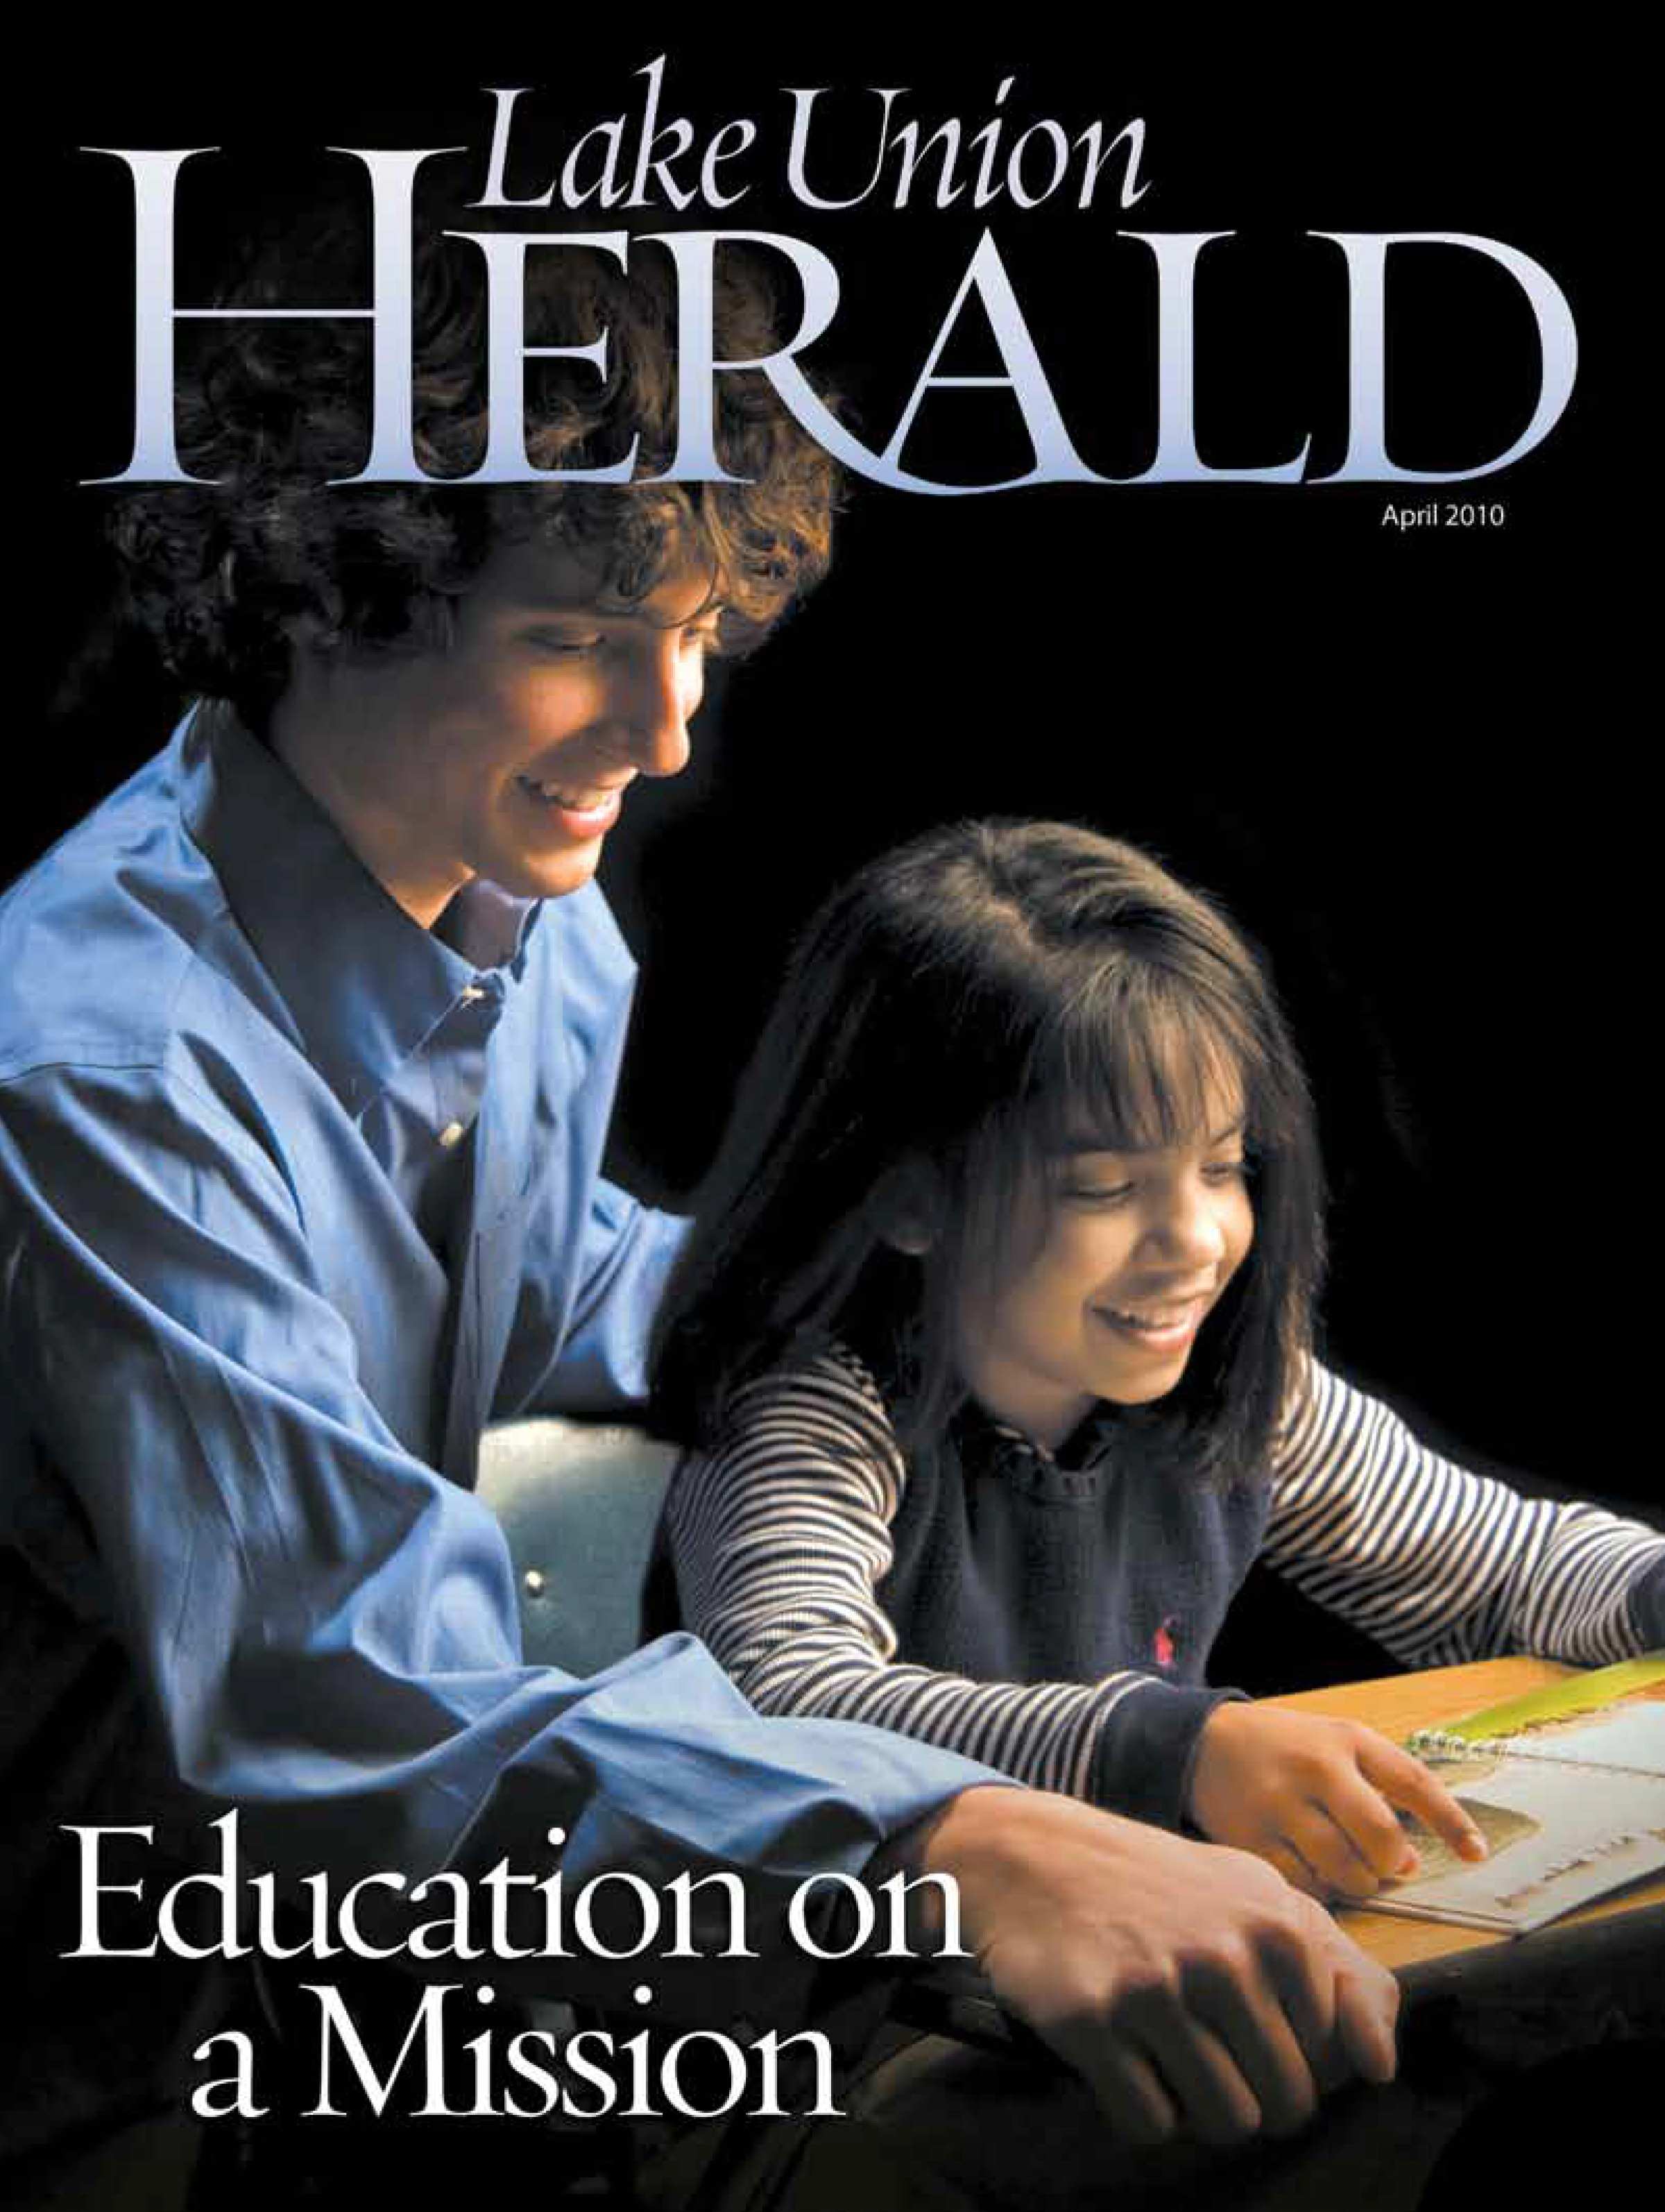 April 2010 Issue